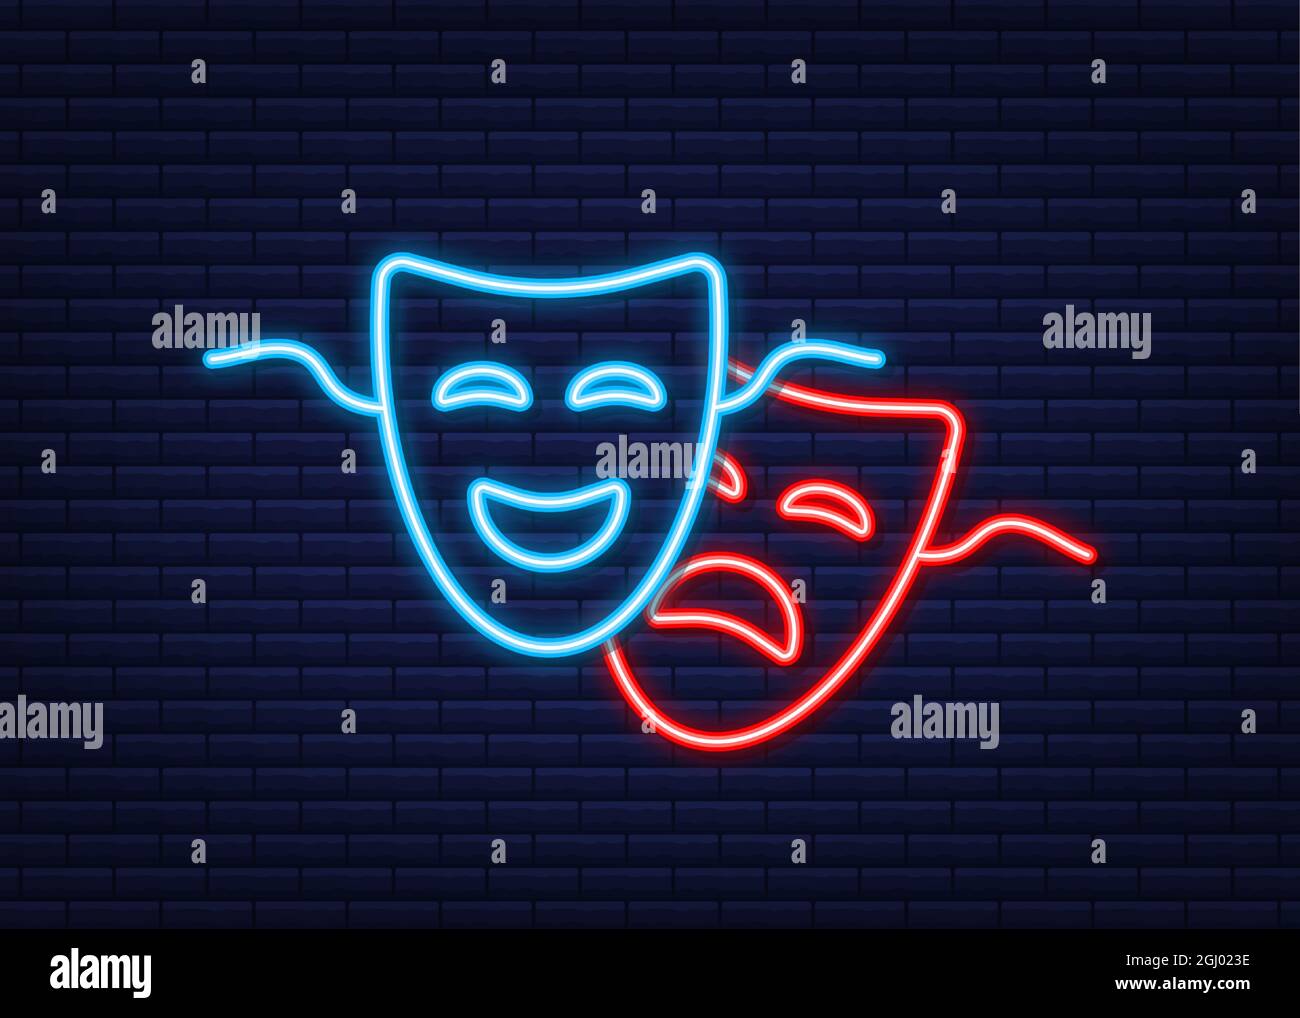 Comedy and tragedy theatrical masks. Neon style. Vector illustration. Stock Vector